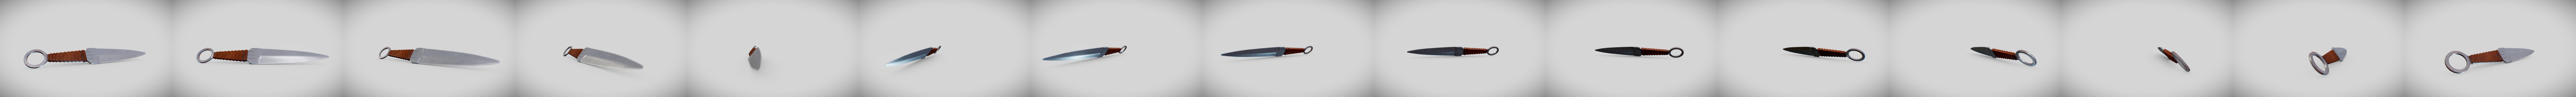 Throwing Knife Download Free 3d Model By Michele Passerino Michele Passerino 30e088c Sketchfab - throwing knife icon roblox